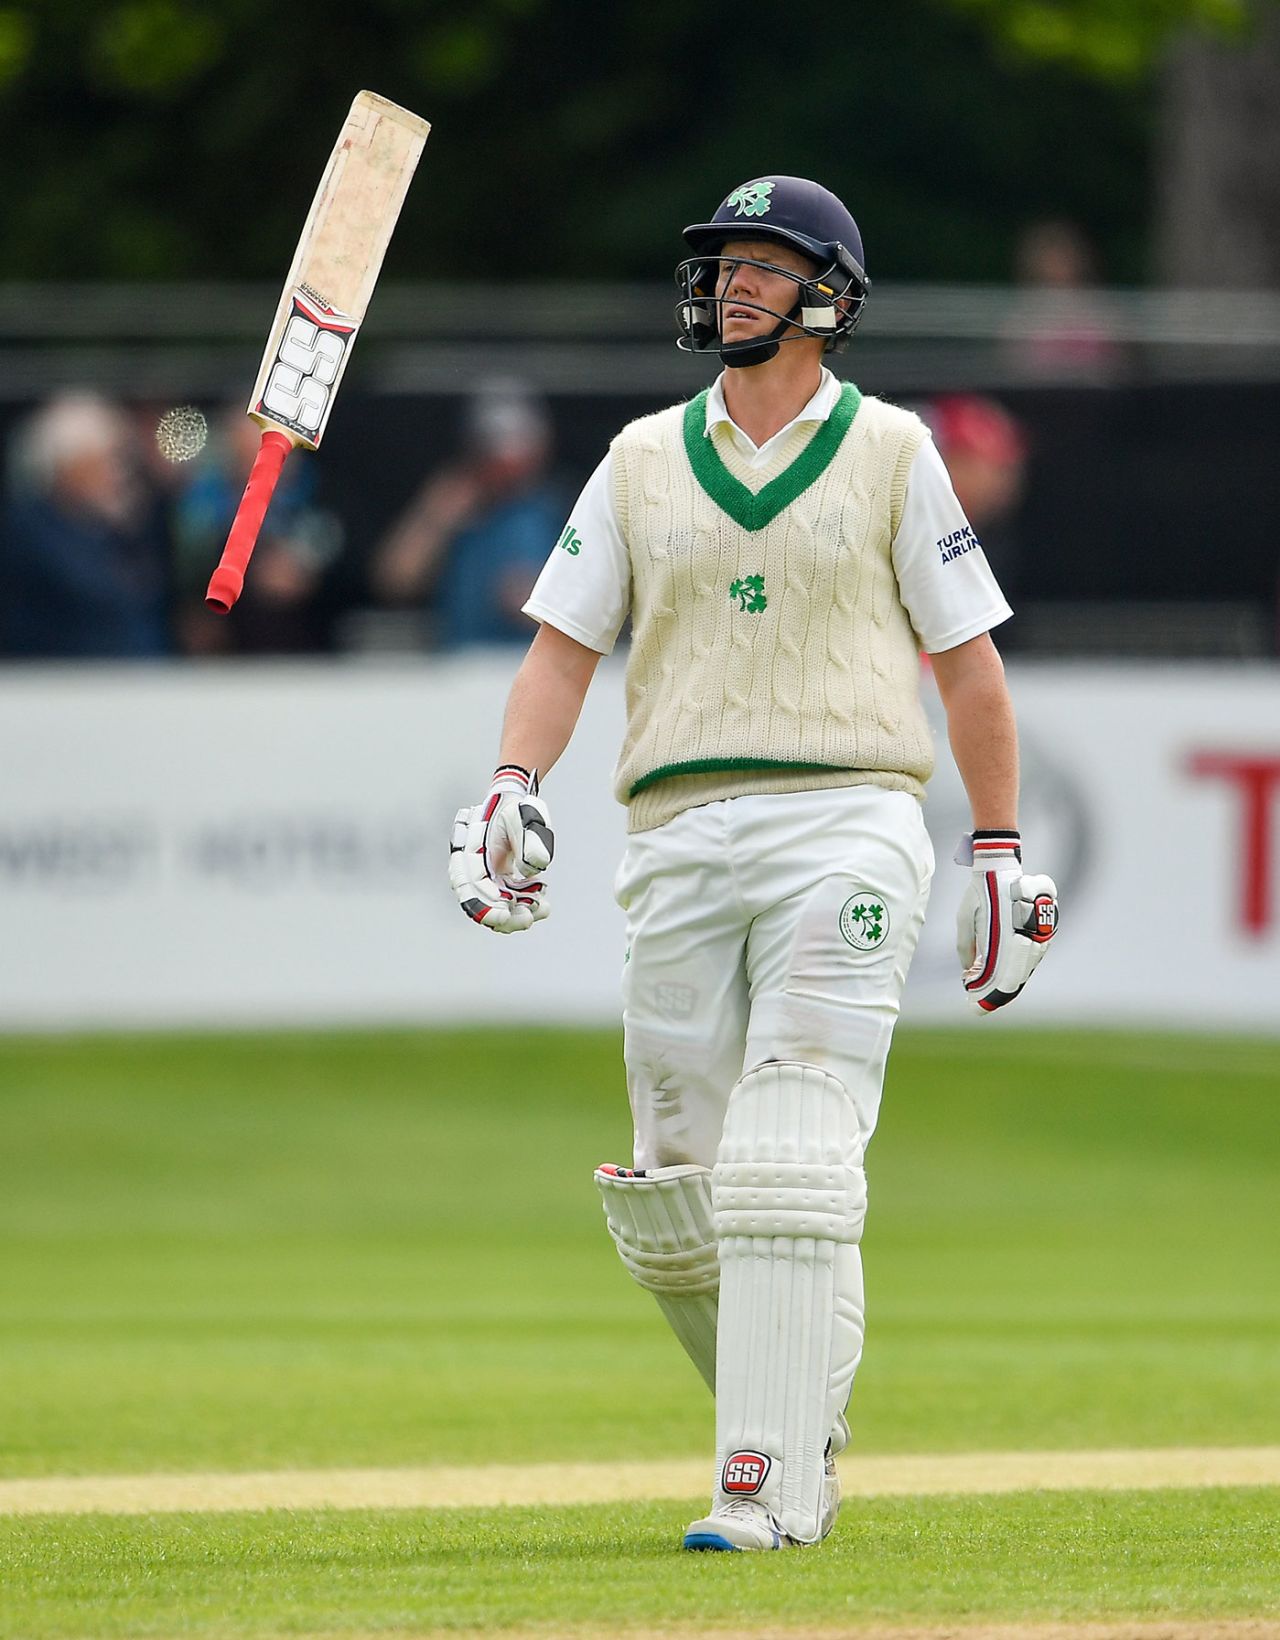 Kevin O'Brien's innings ended on 118, Ireland v Pakistan, Only Test, Malahide, 5th day, May 15, 2018